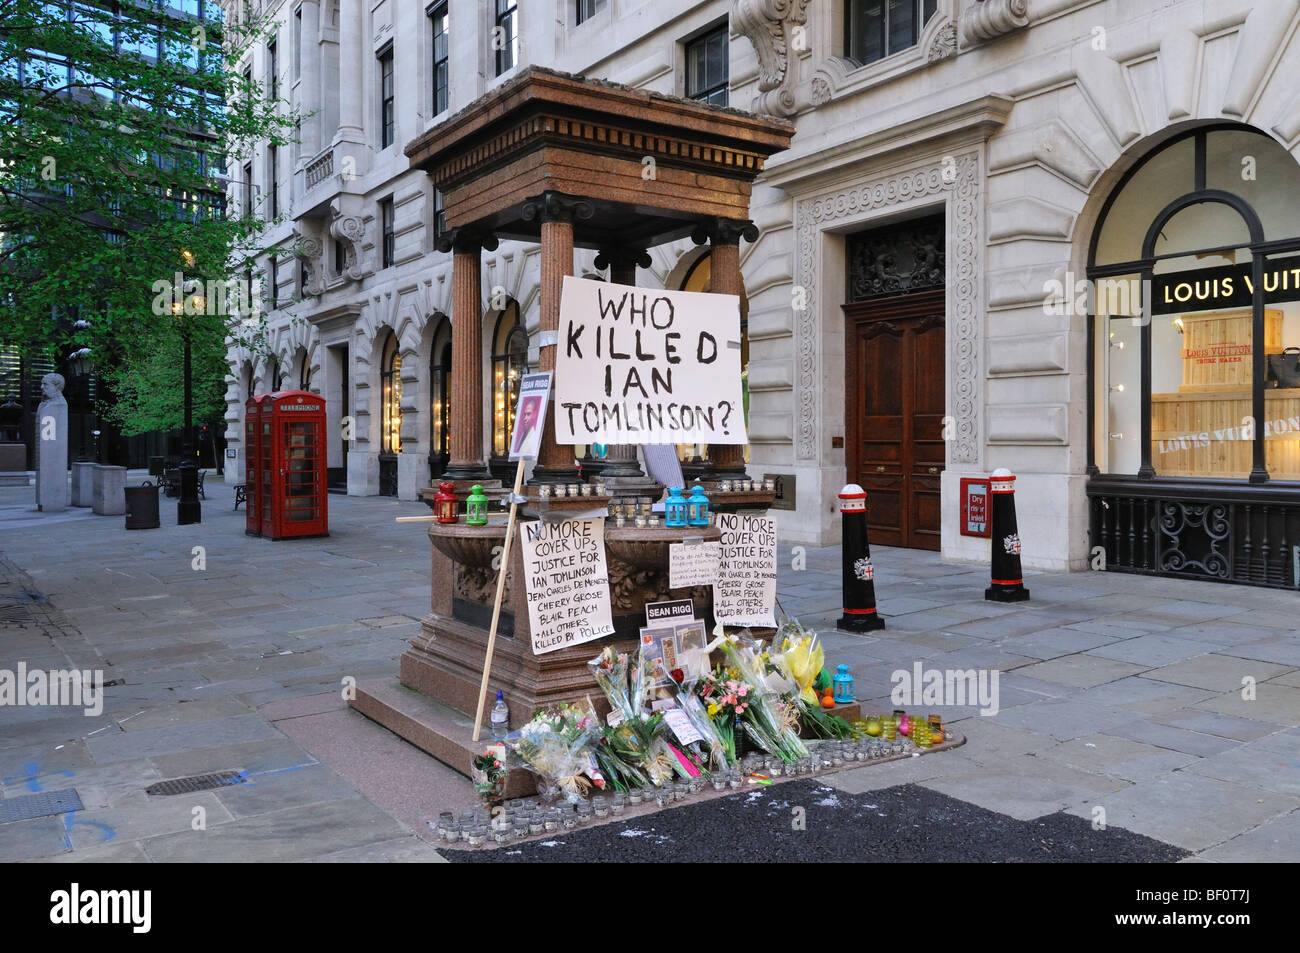 City of London, shrine to Ian Tomlinson in who died at the G20 protests Stock Photo